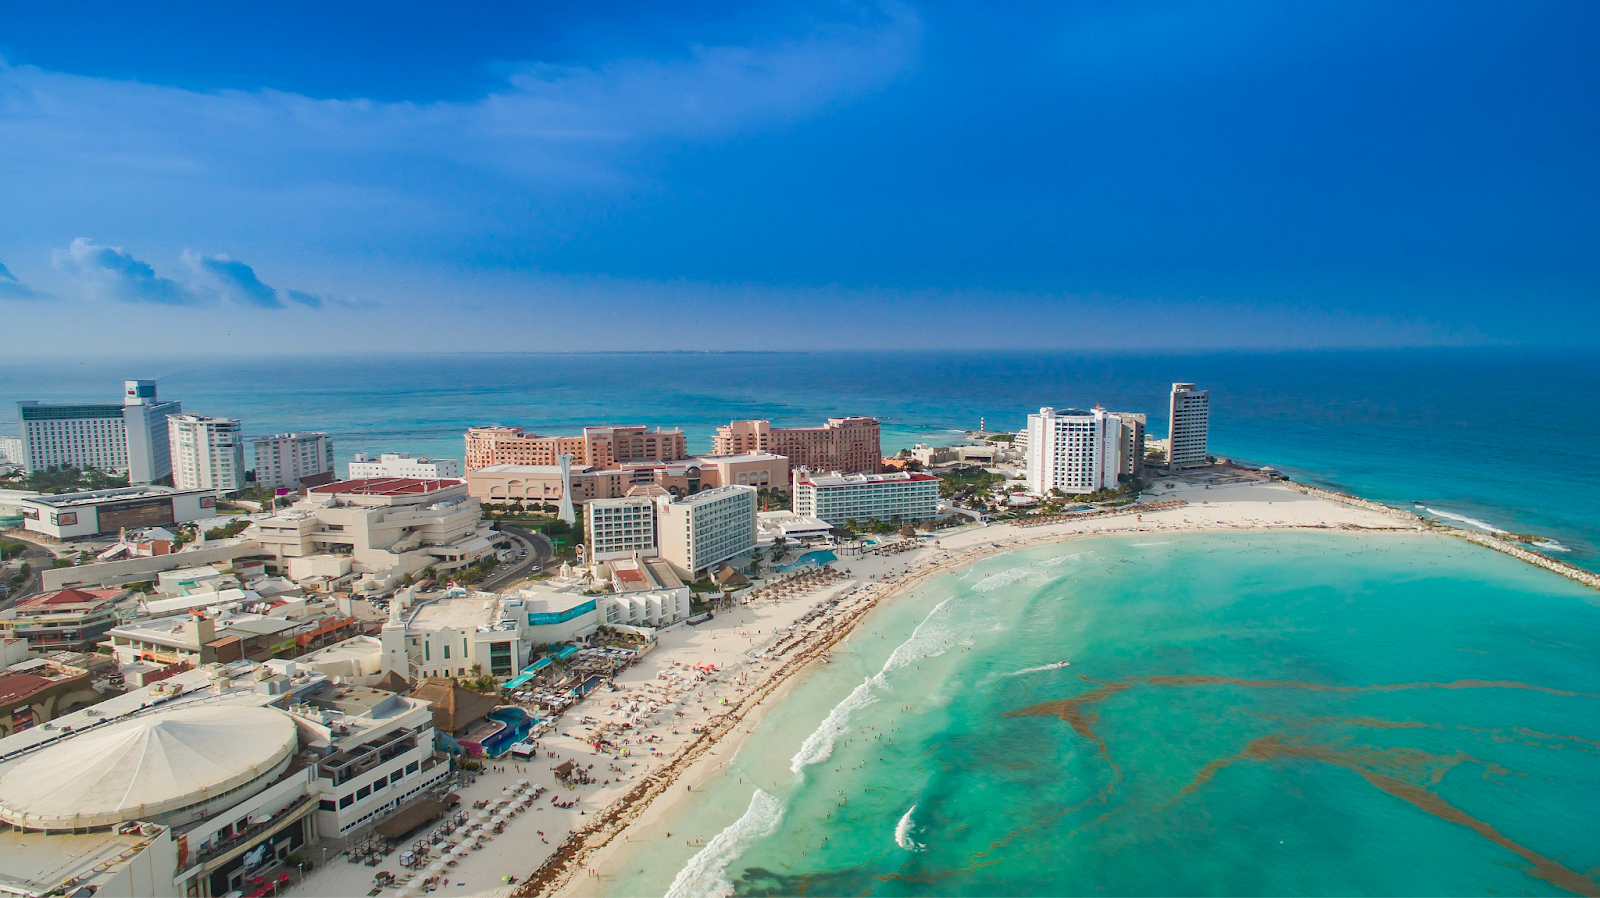 The aerial photo of Cancún, courtesy of dronepicr - Cancun Strand Luftbild, CC BY 2.0